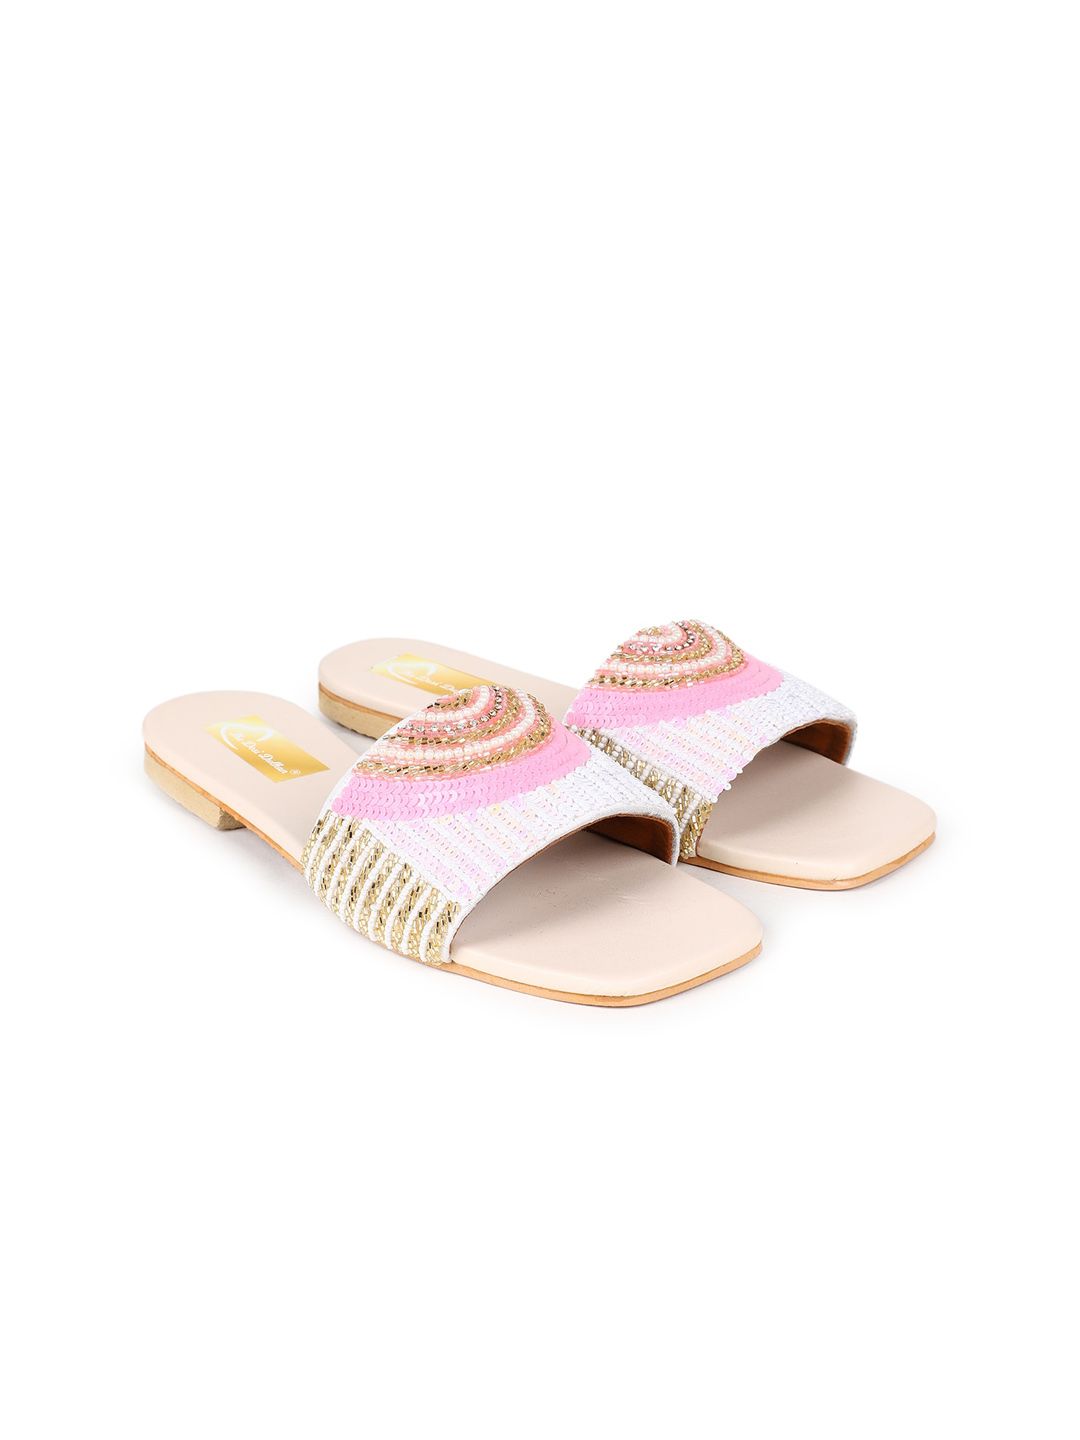 The Desi Dulhan Women Embellished Ethnic Open Toe Flats Price in India